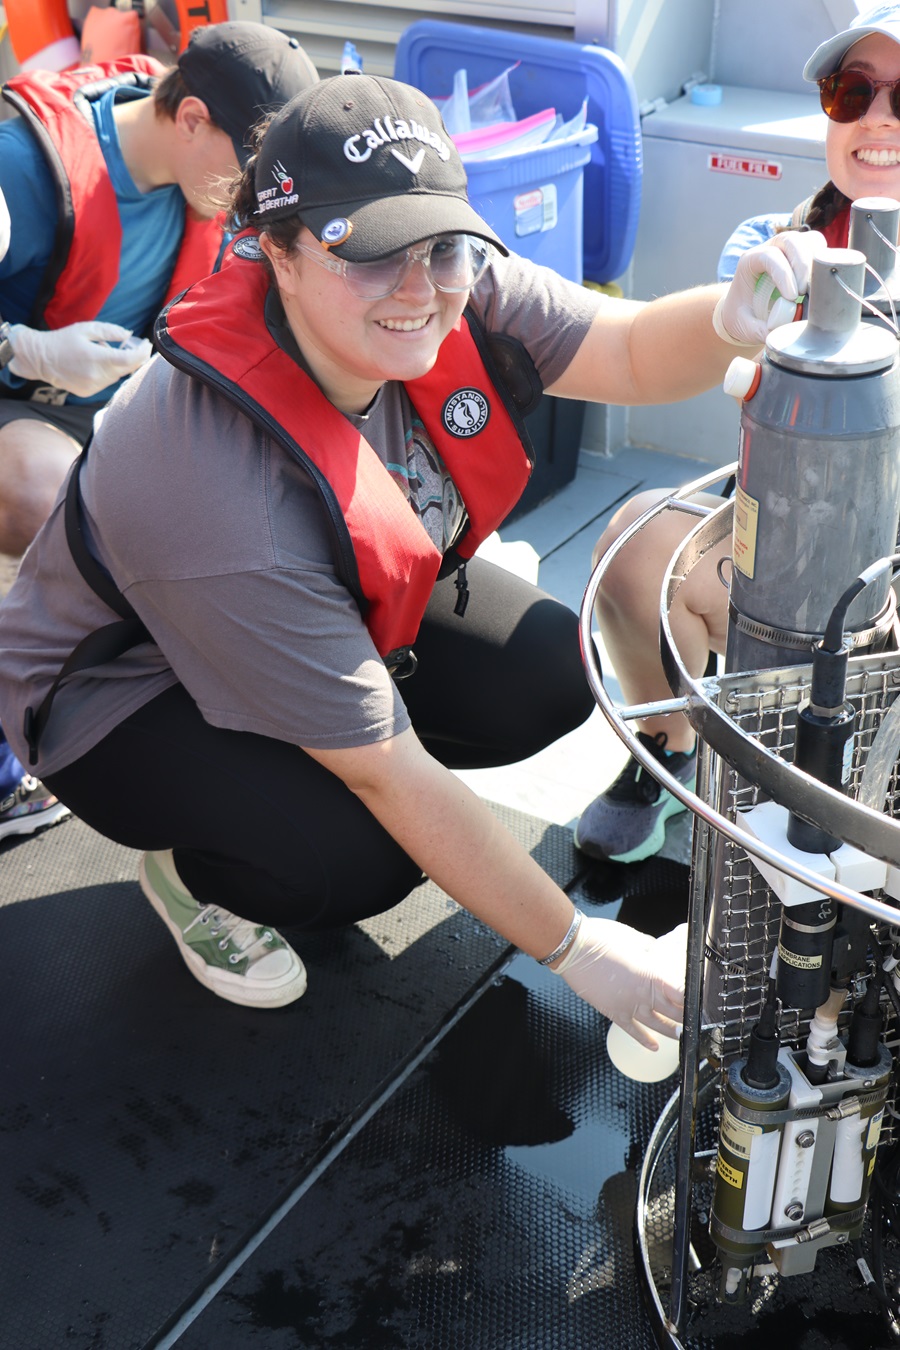 Northwest student Lauren Valenzuela spent her fall semester at the Bigelow Laboratory for Ocean Sciences in East Boothbay, Maine, where she completed additional coursework and took advantage of opportunities to work on research projects. (Submitted photos)